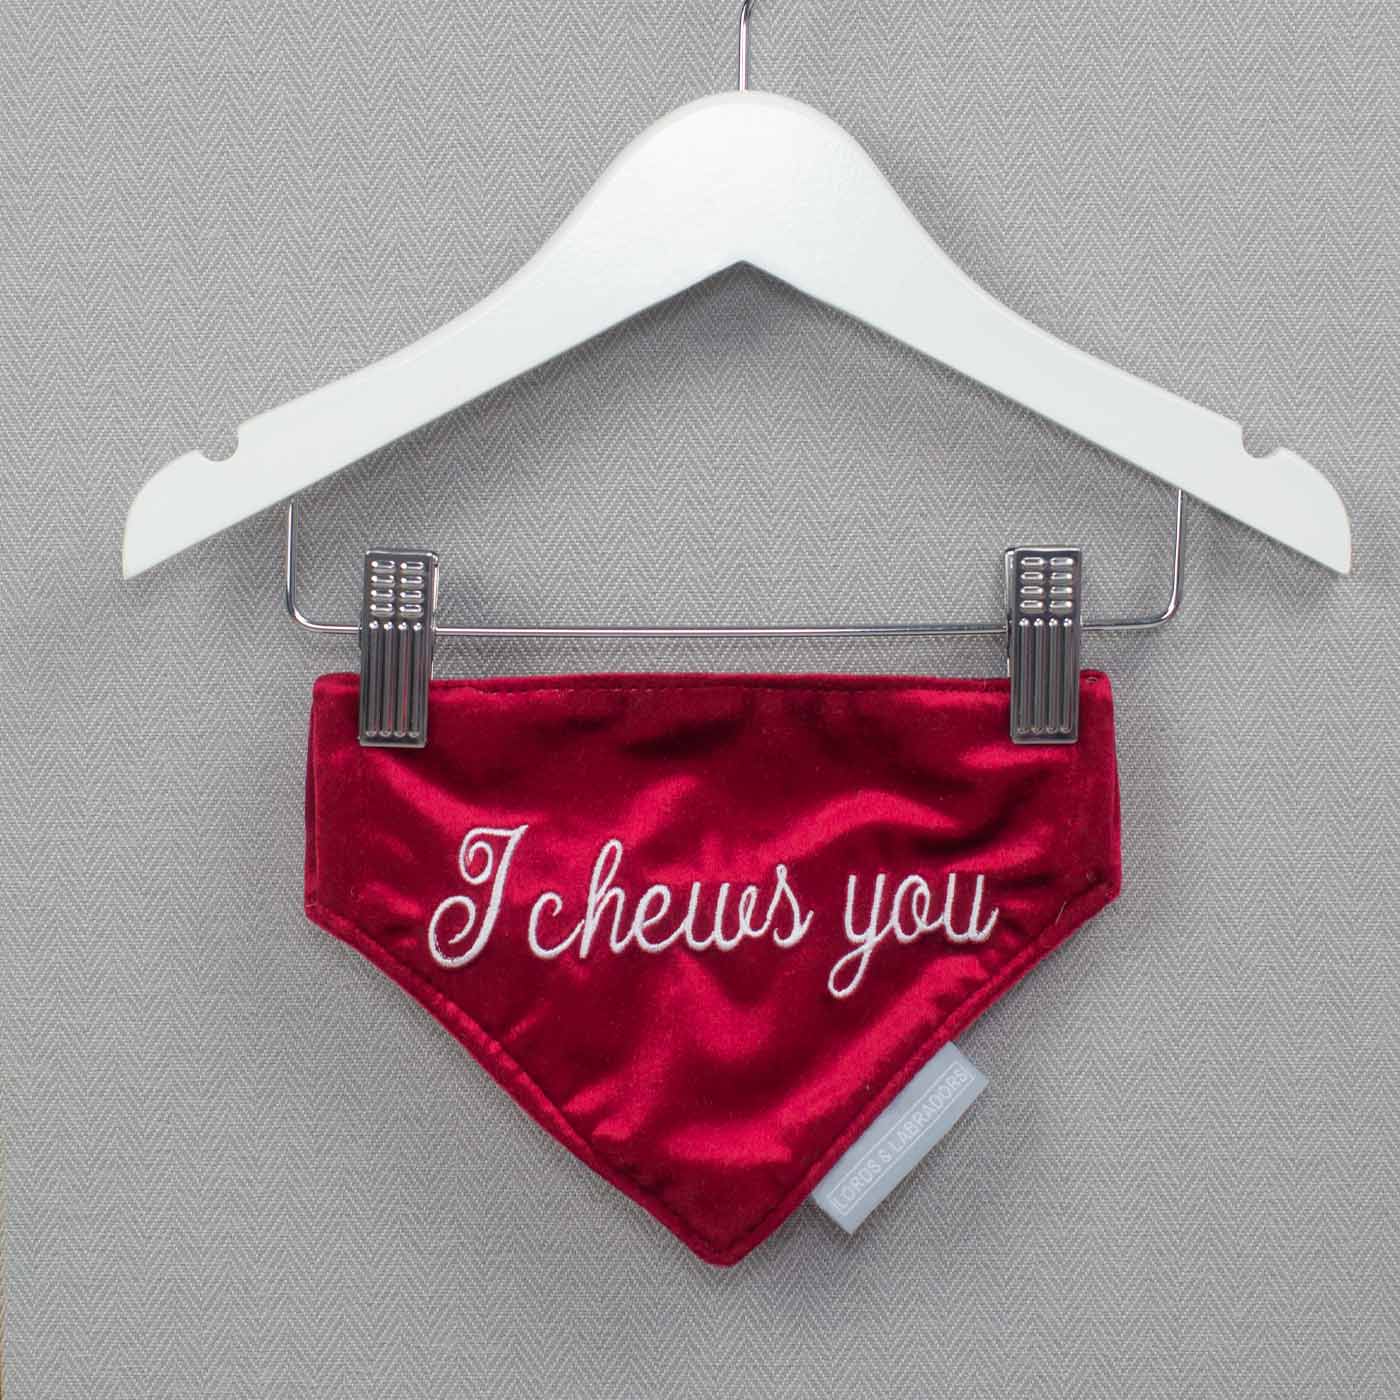 [color:cranberry velvet] Discover The Perfect Bandana For Dogs, 'I Chews You' Valentine Dog Bandana In Luxury Cranberry Velvet, Available Now at Lords & Labradors US